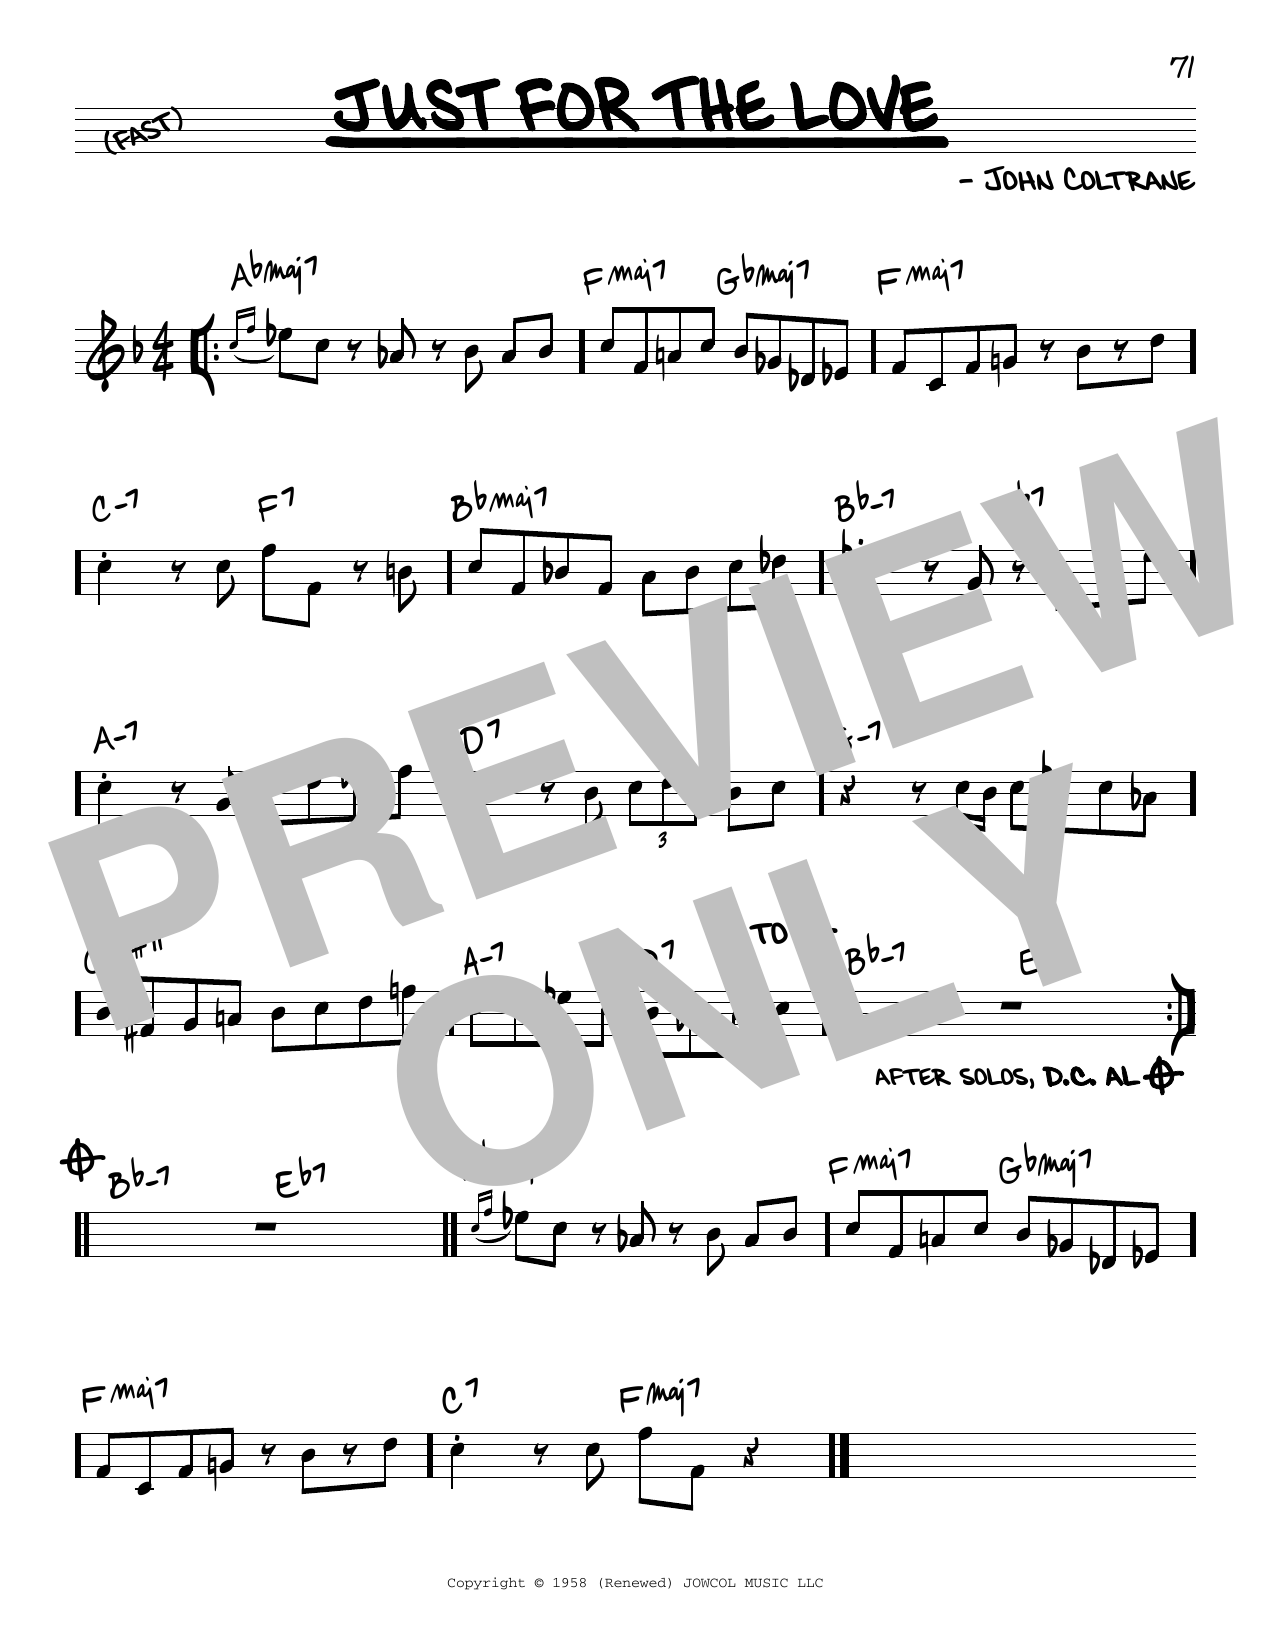 Download John Coltrane Just For The Love Sheet Music